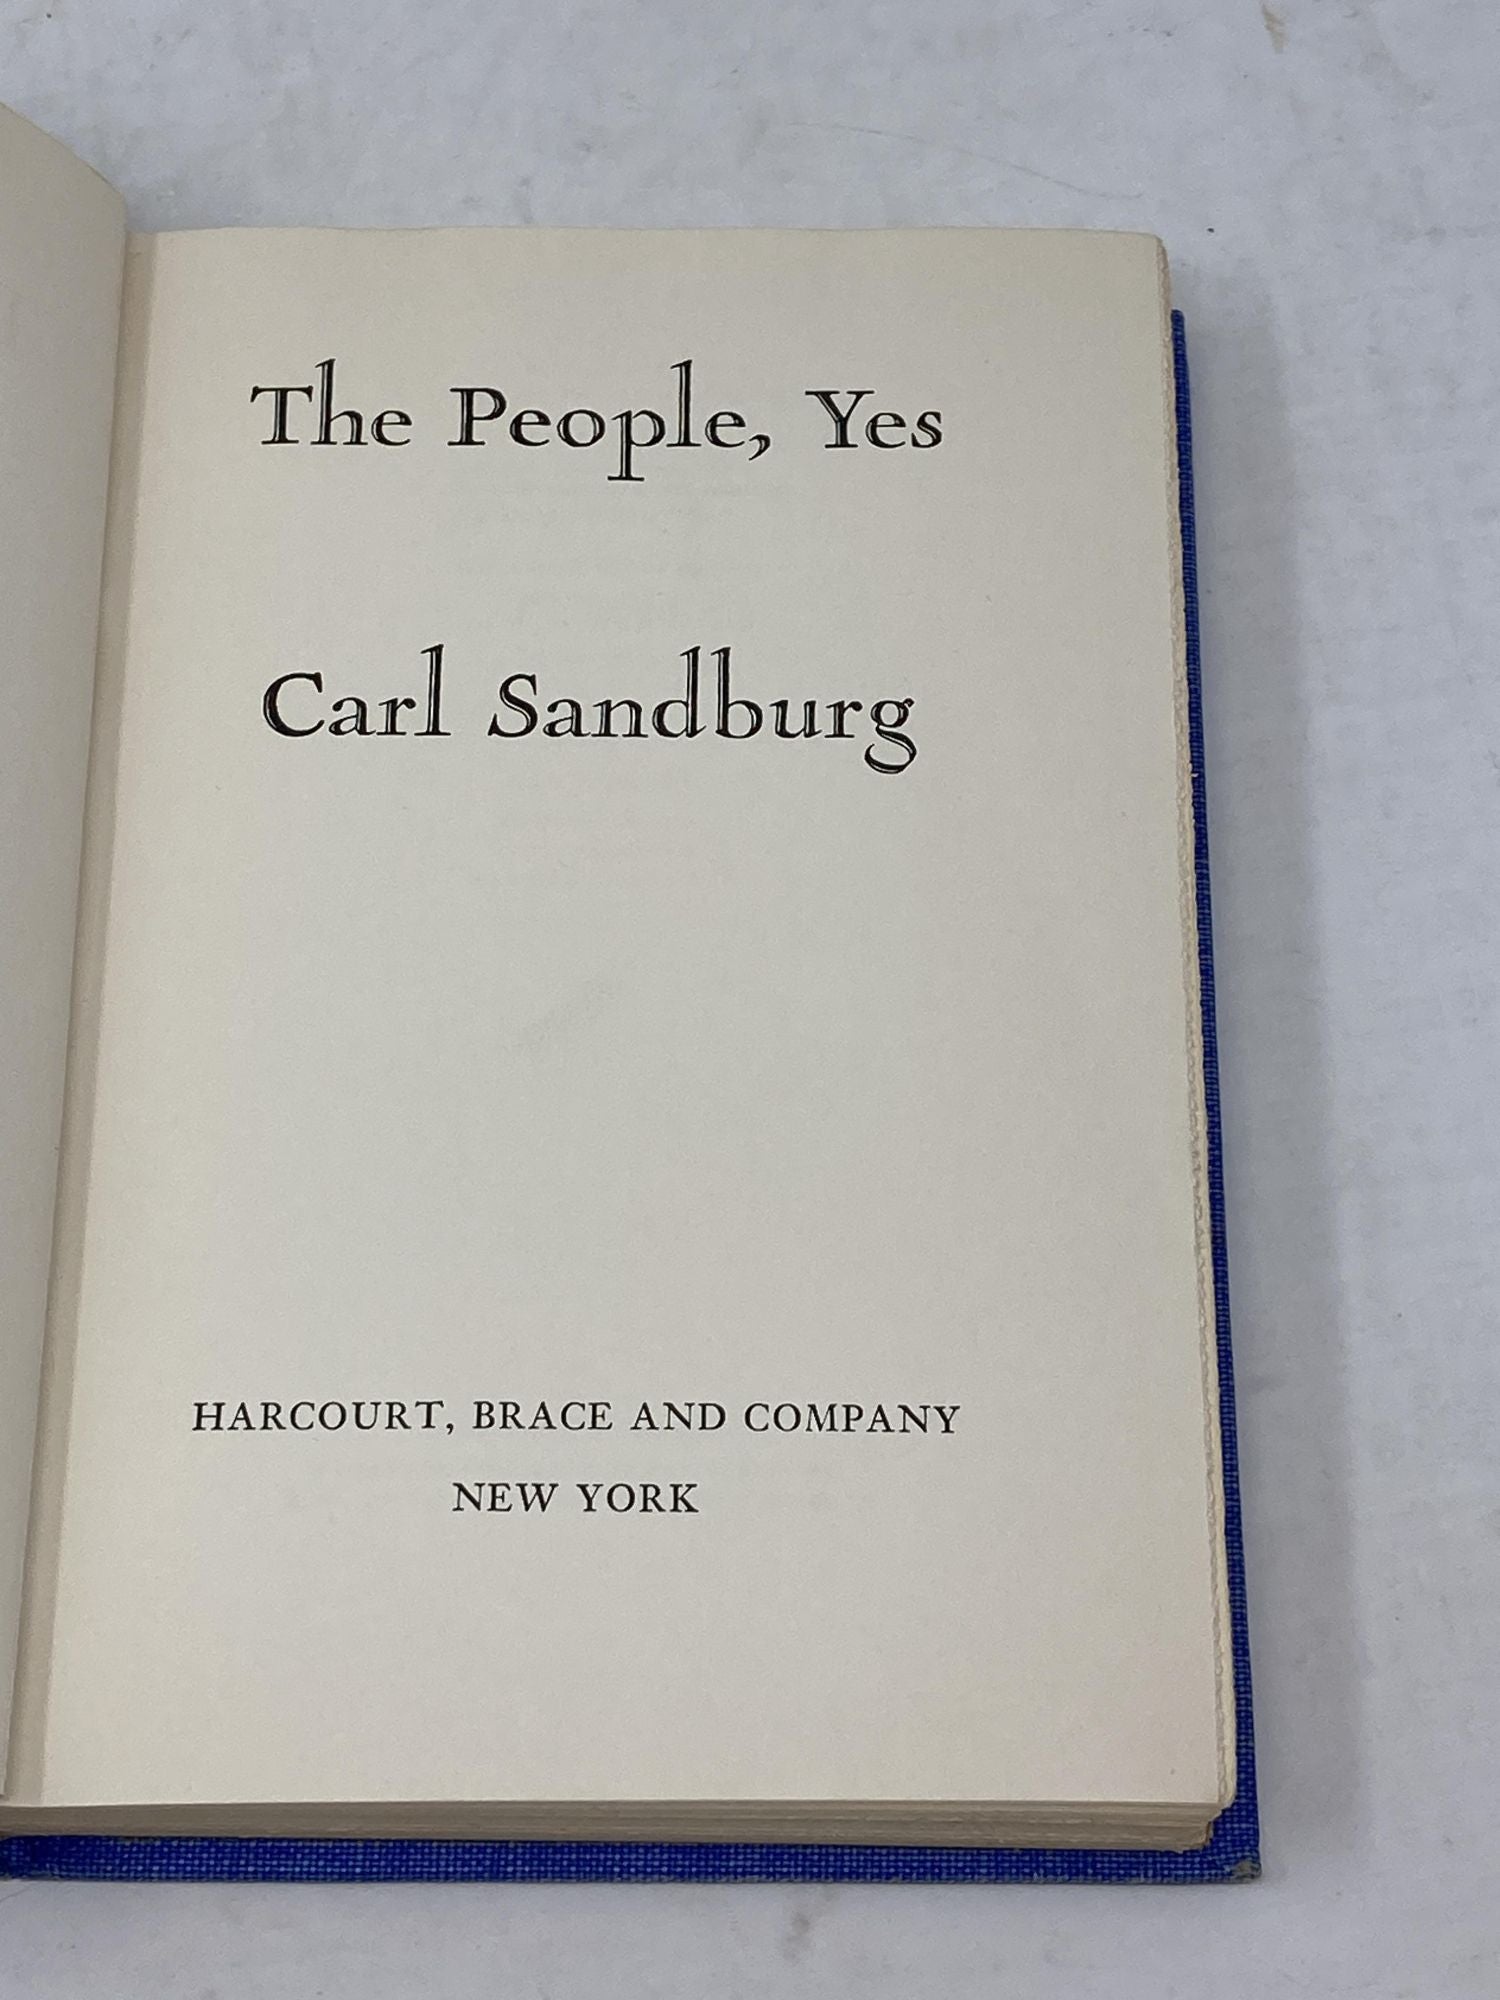 Sandburg, Carl - The People, Yes (Signed)